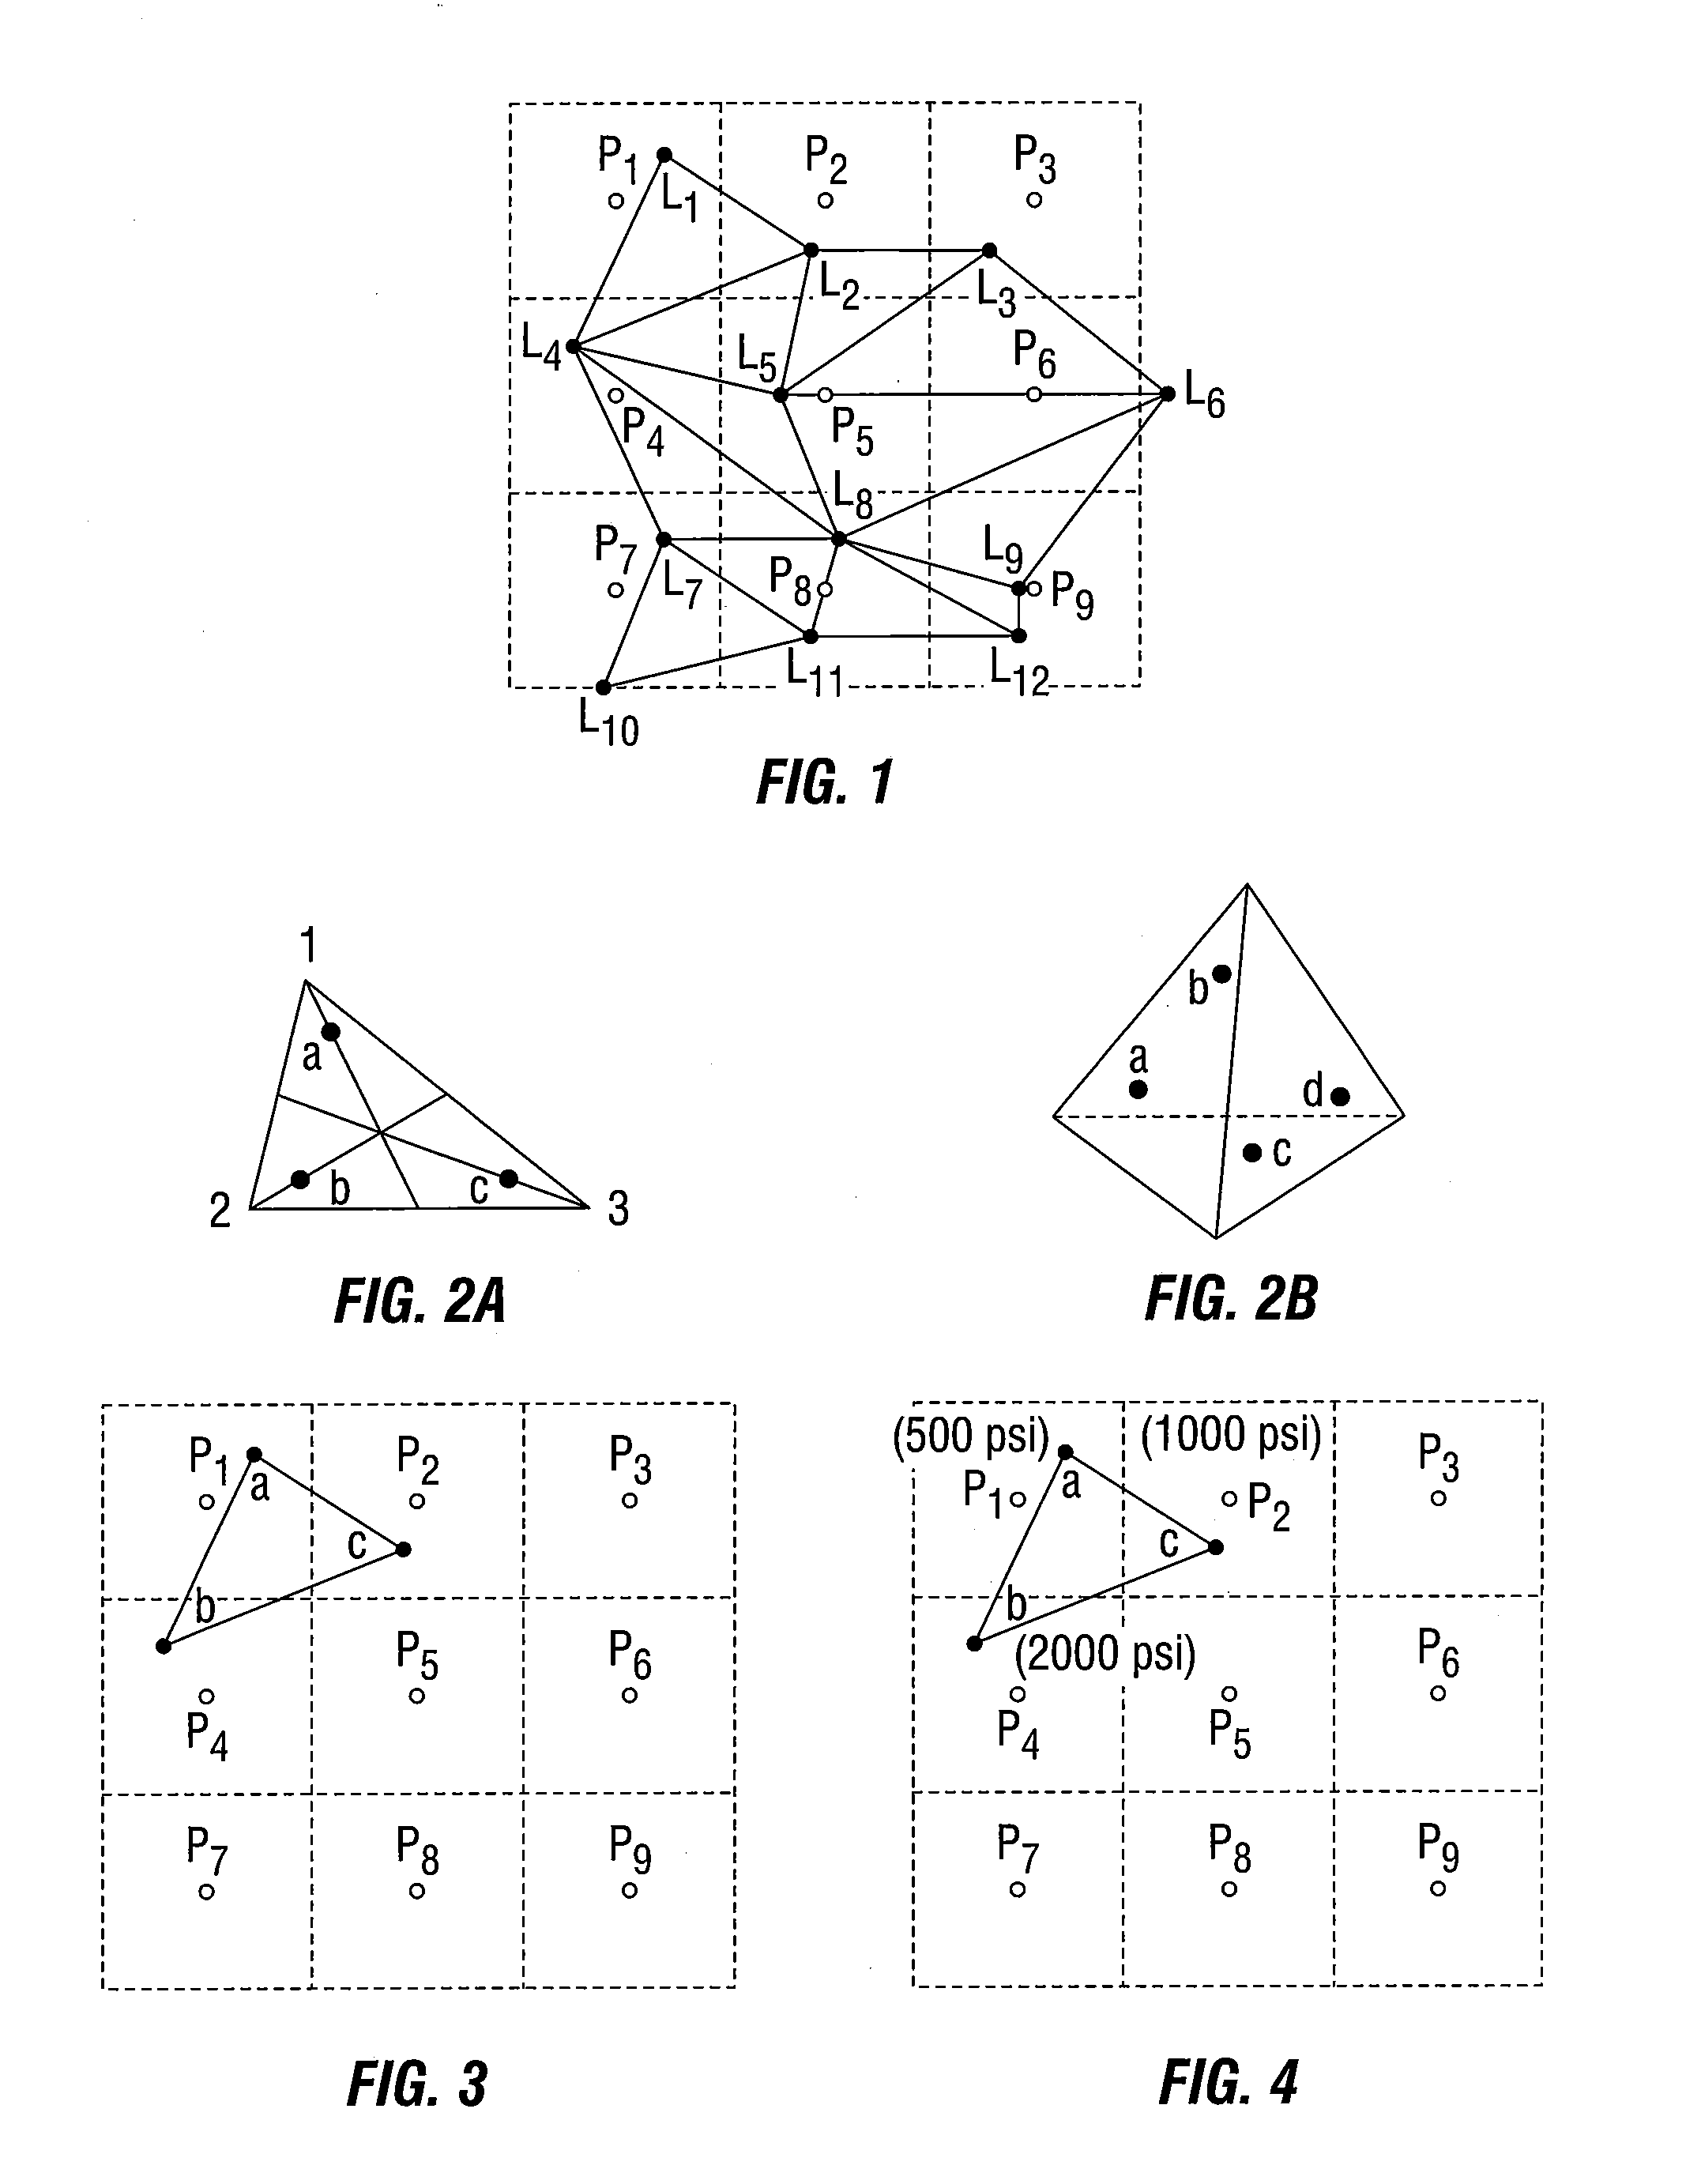 Efficient data mapping technique for simulation coupling using least squares finite element method